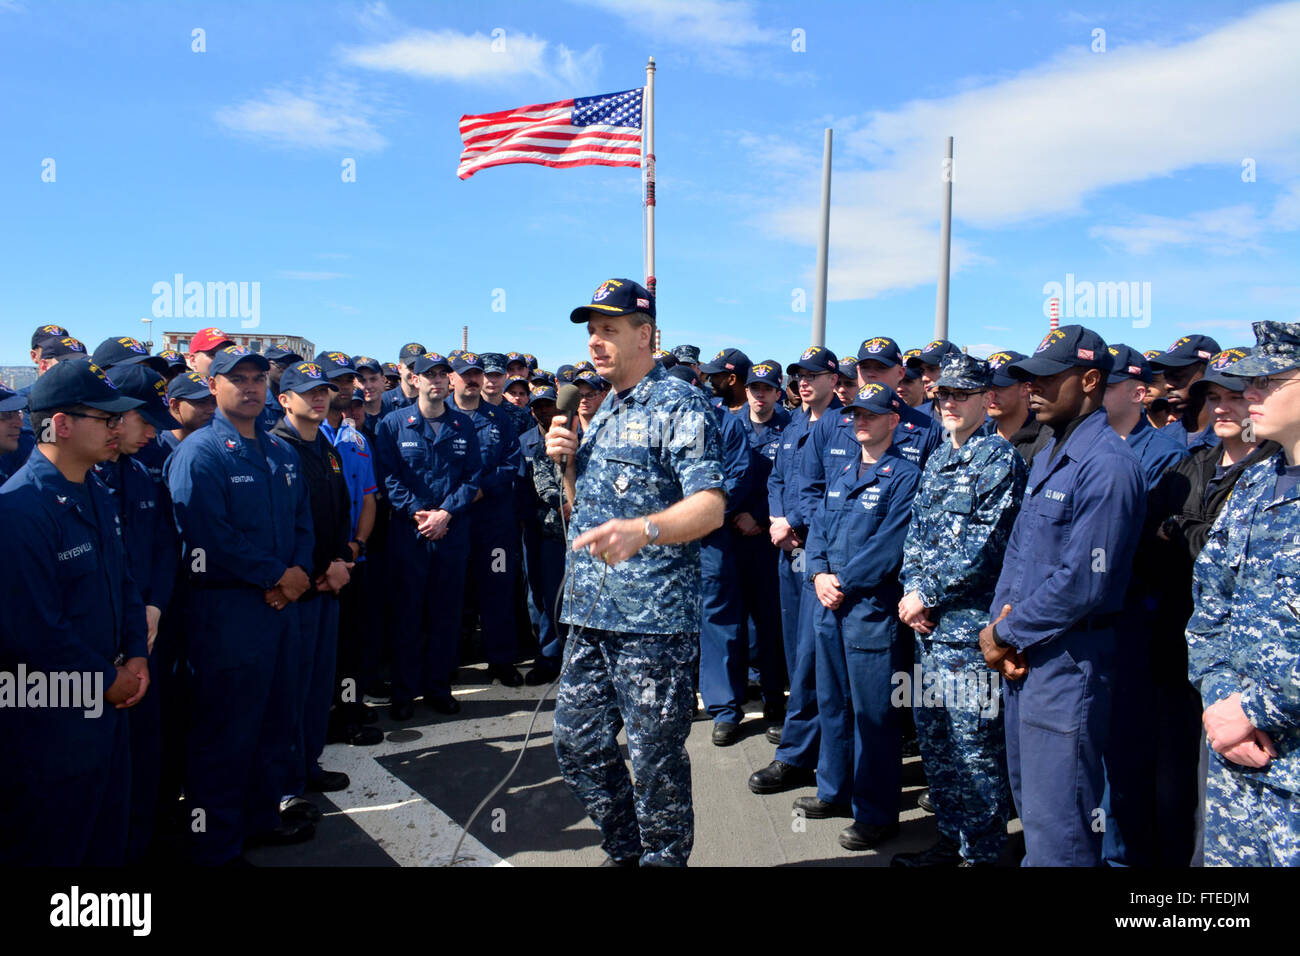 140417-N-ZZ999-002: AUGUSTA BAY, Italy (April 17, 2014) - Vice Adm. Phil Davidson, commander, U.S. 6th Fleet, addresses the crew during an all-hands call aboard the guided-missile destroyer USS Ramage (DDG 61). Ramage, homeported in Norfolk, Va., is on a scheduled deployment supporting maritime security operations and theater security cooperation efforts in the U.S. 6th Fleet area of operations. (U.S. Navy photo by Seaman Kenneth Moore/Released)   Join the conversation on Twitter ( https://twitter.com/naveur navaf )  follow us on Facebook ( https://www.facebook.com/USNavalForcesEuropeAfrica )  Stock Photo